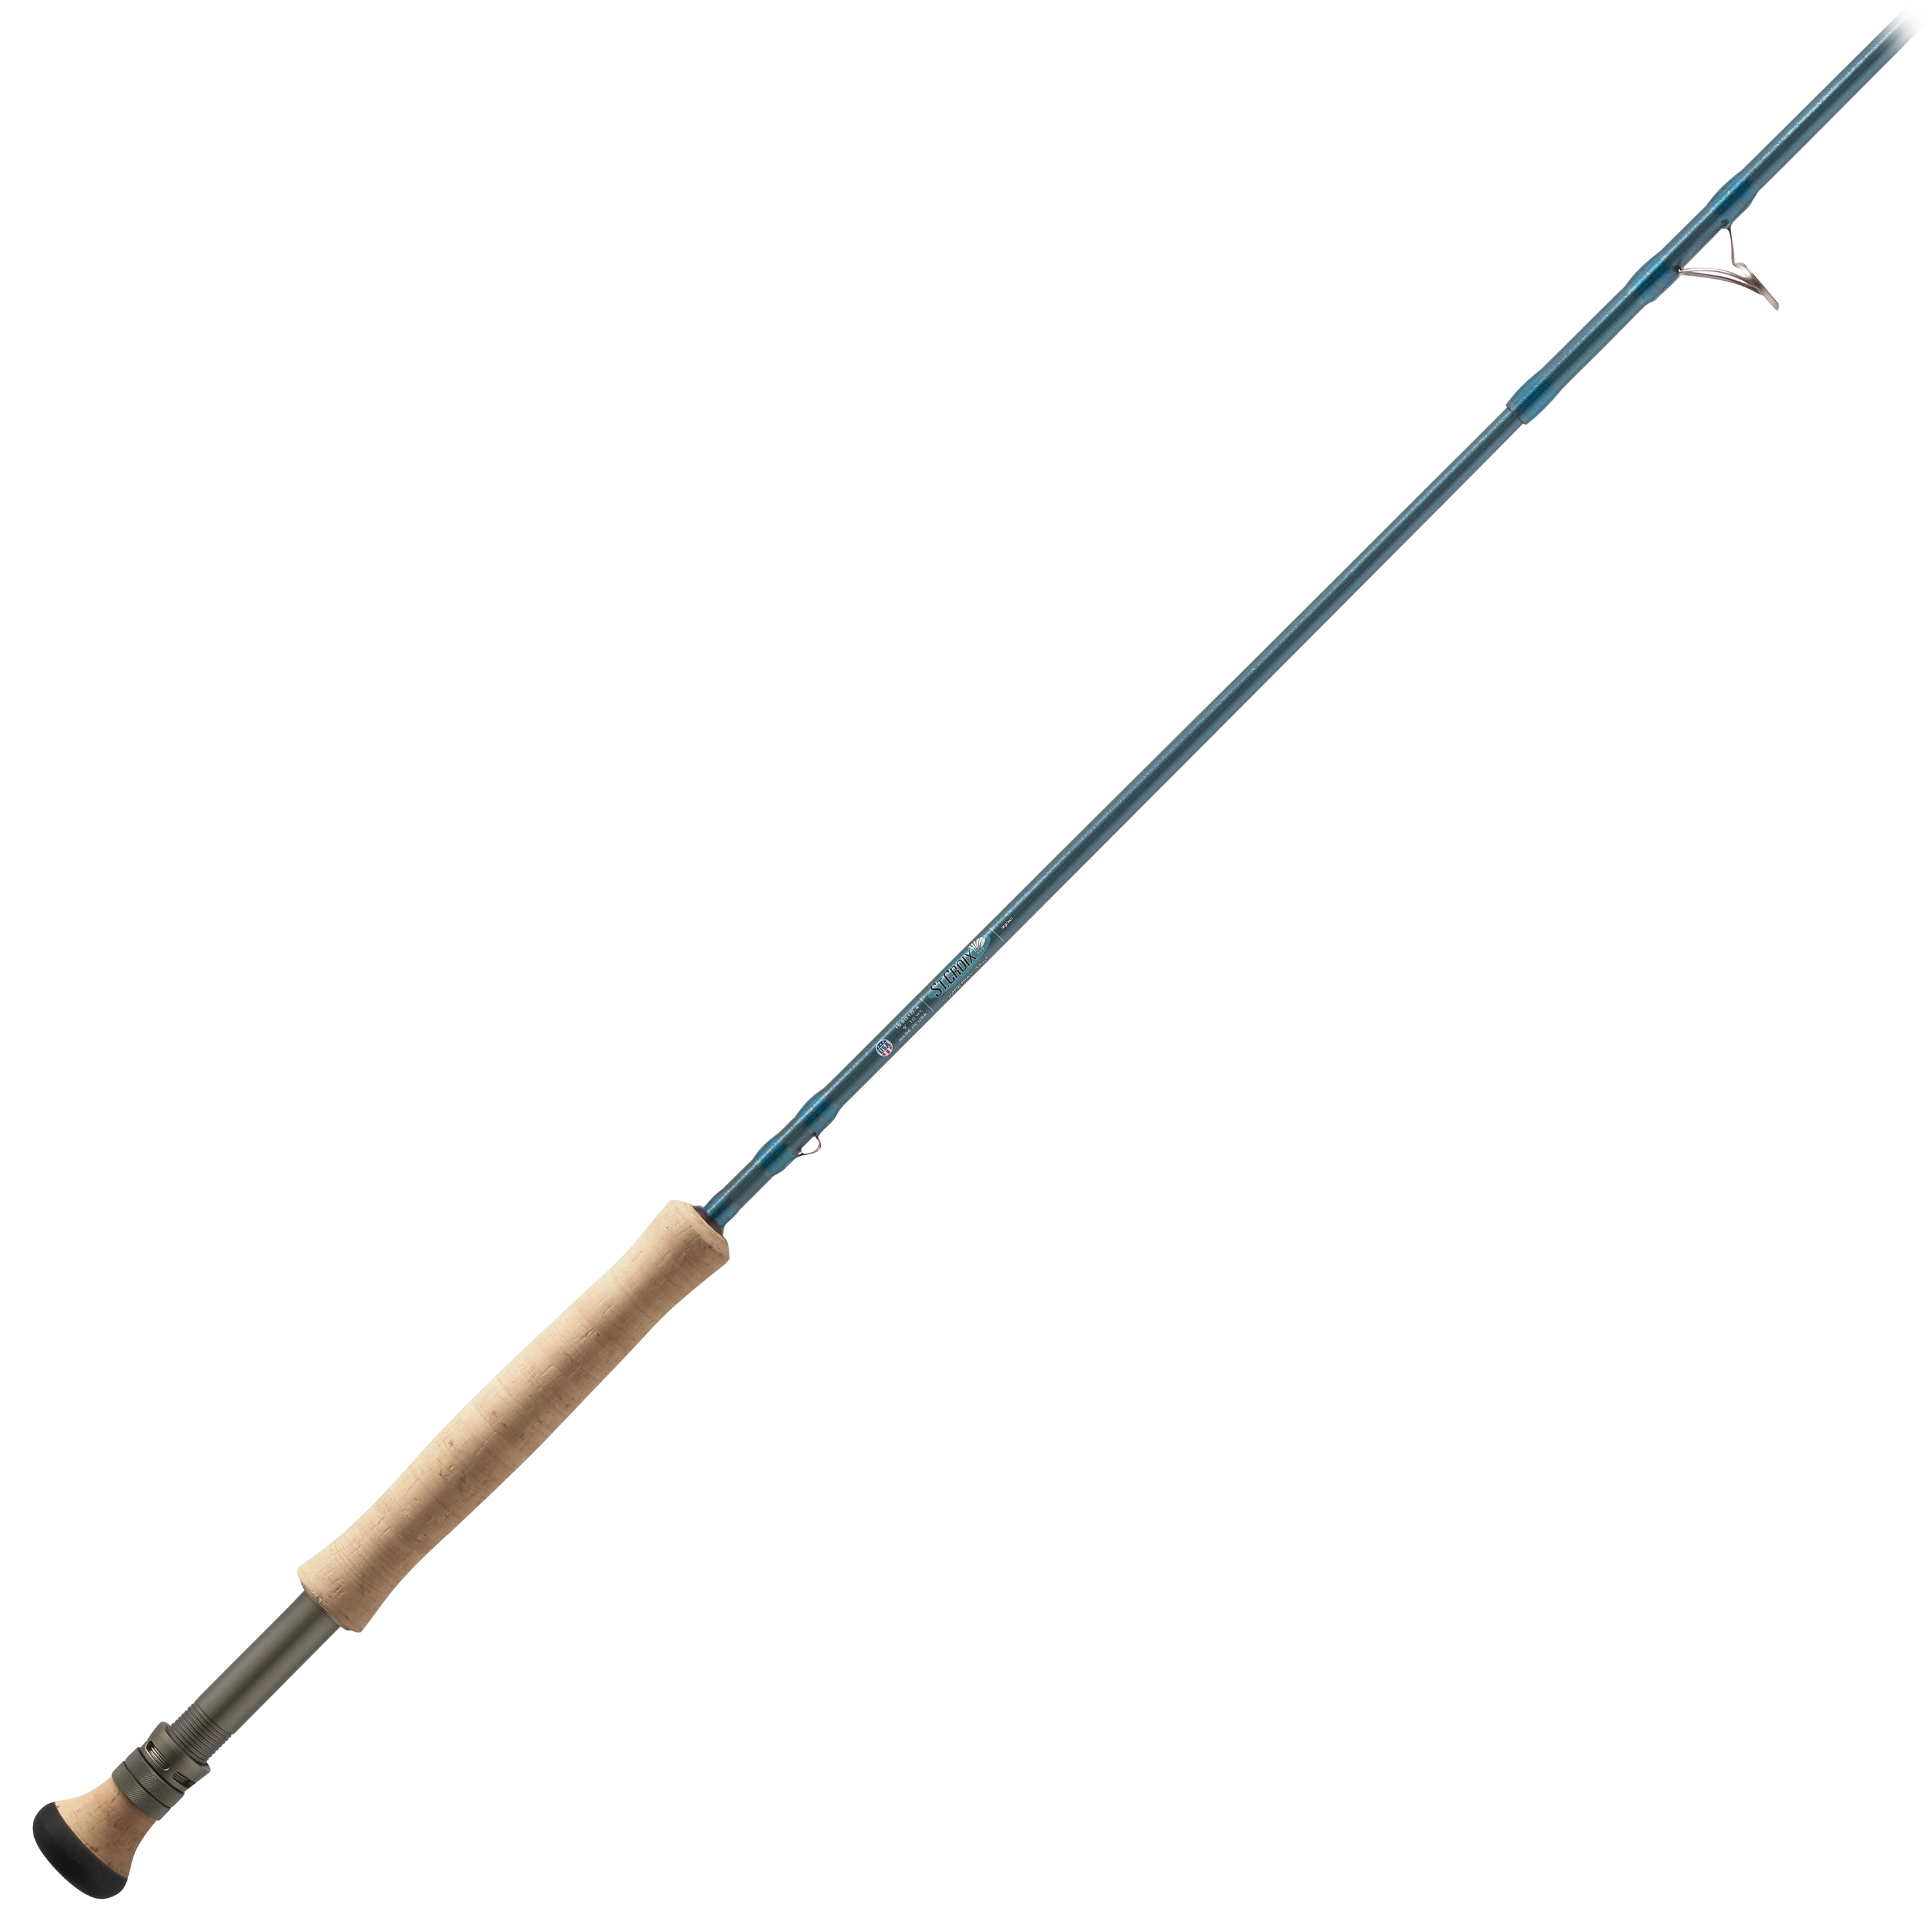 St. Croix Imperial Salt Fly Rod - IS9010.4